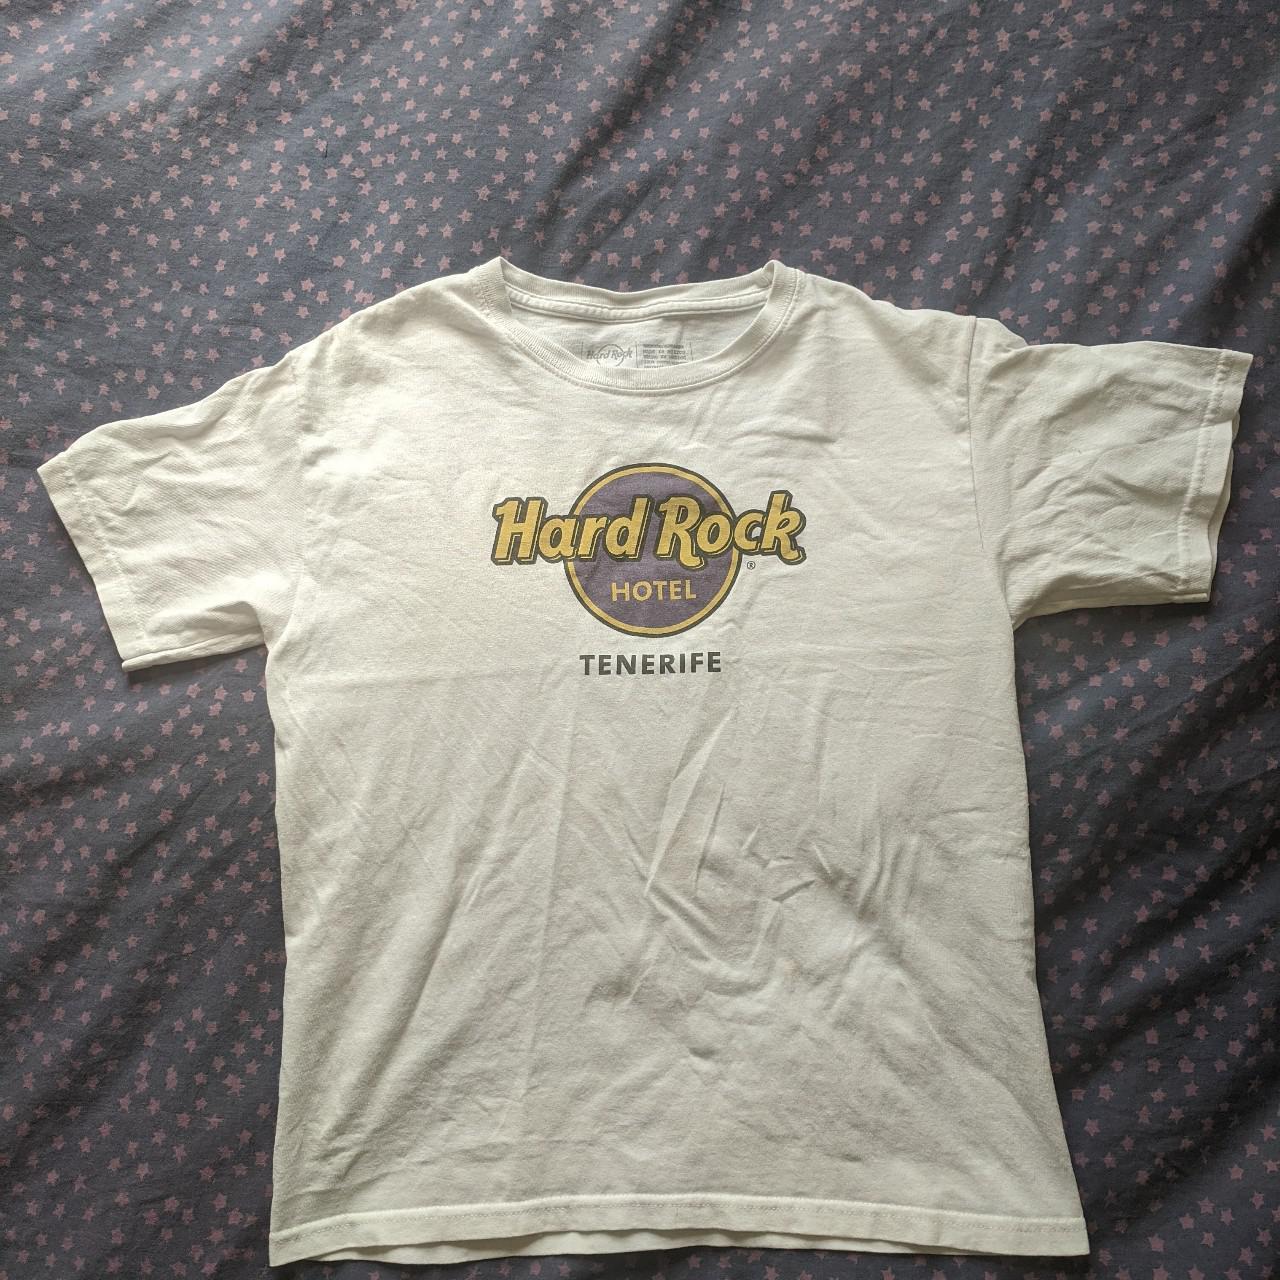 Product Image 1 - Hard rock t shirt in